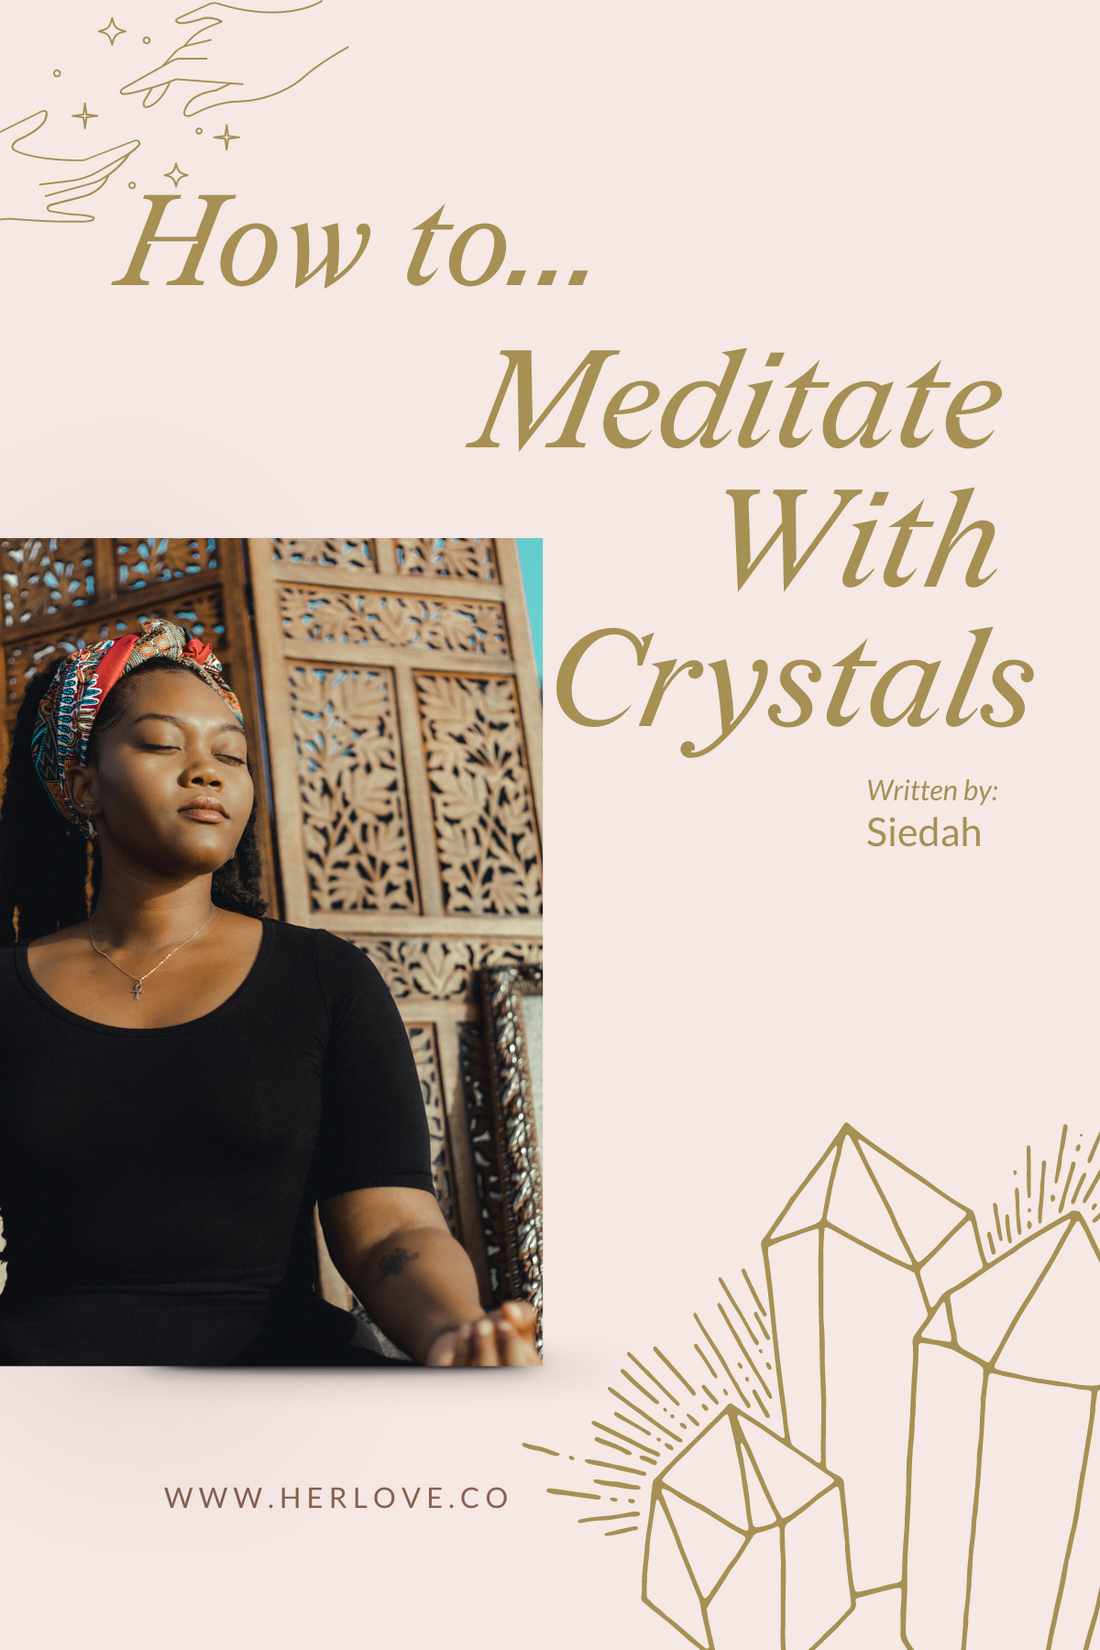 How To Meditate With Crystals?